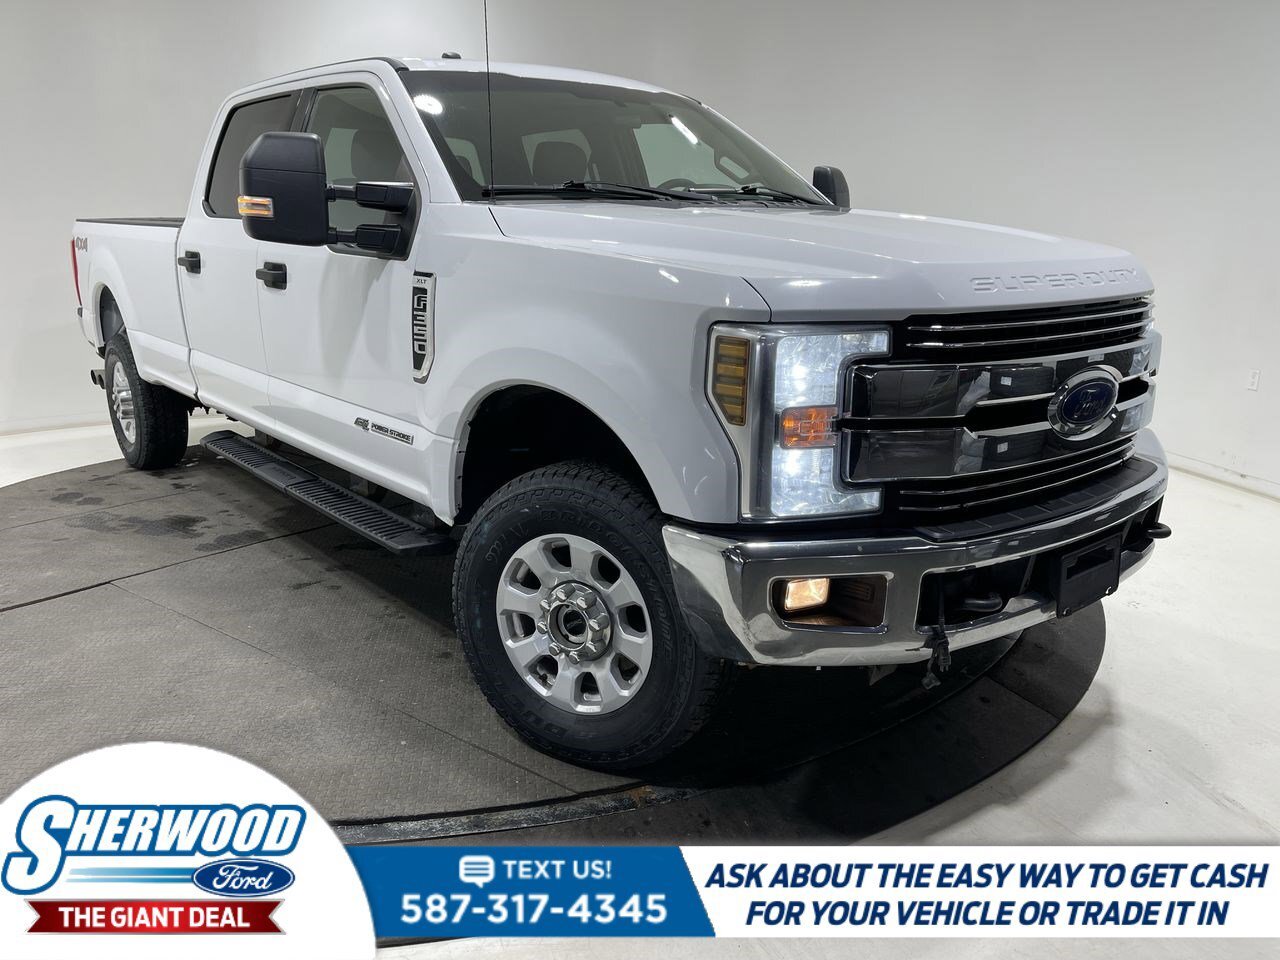 2018 Ford F-350 XLT - $0 Down $215 Weekly